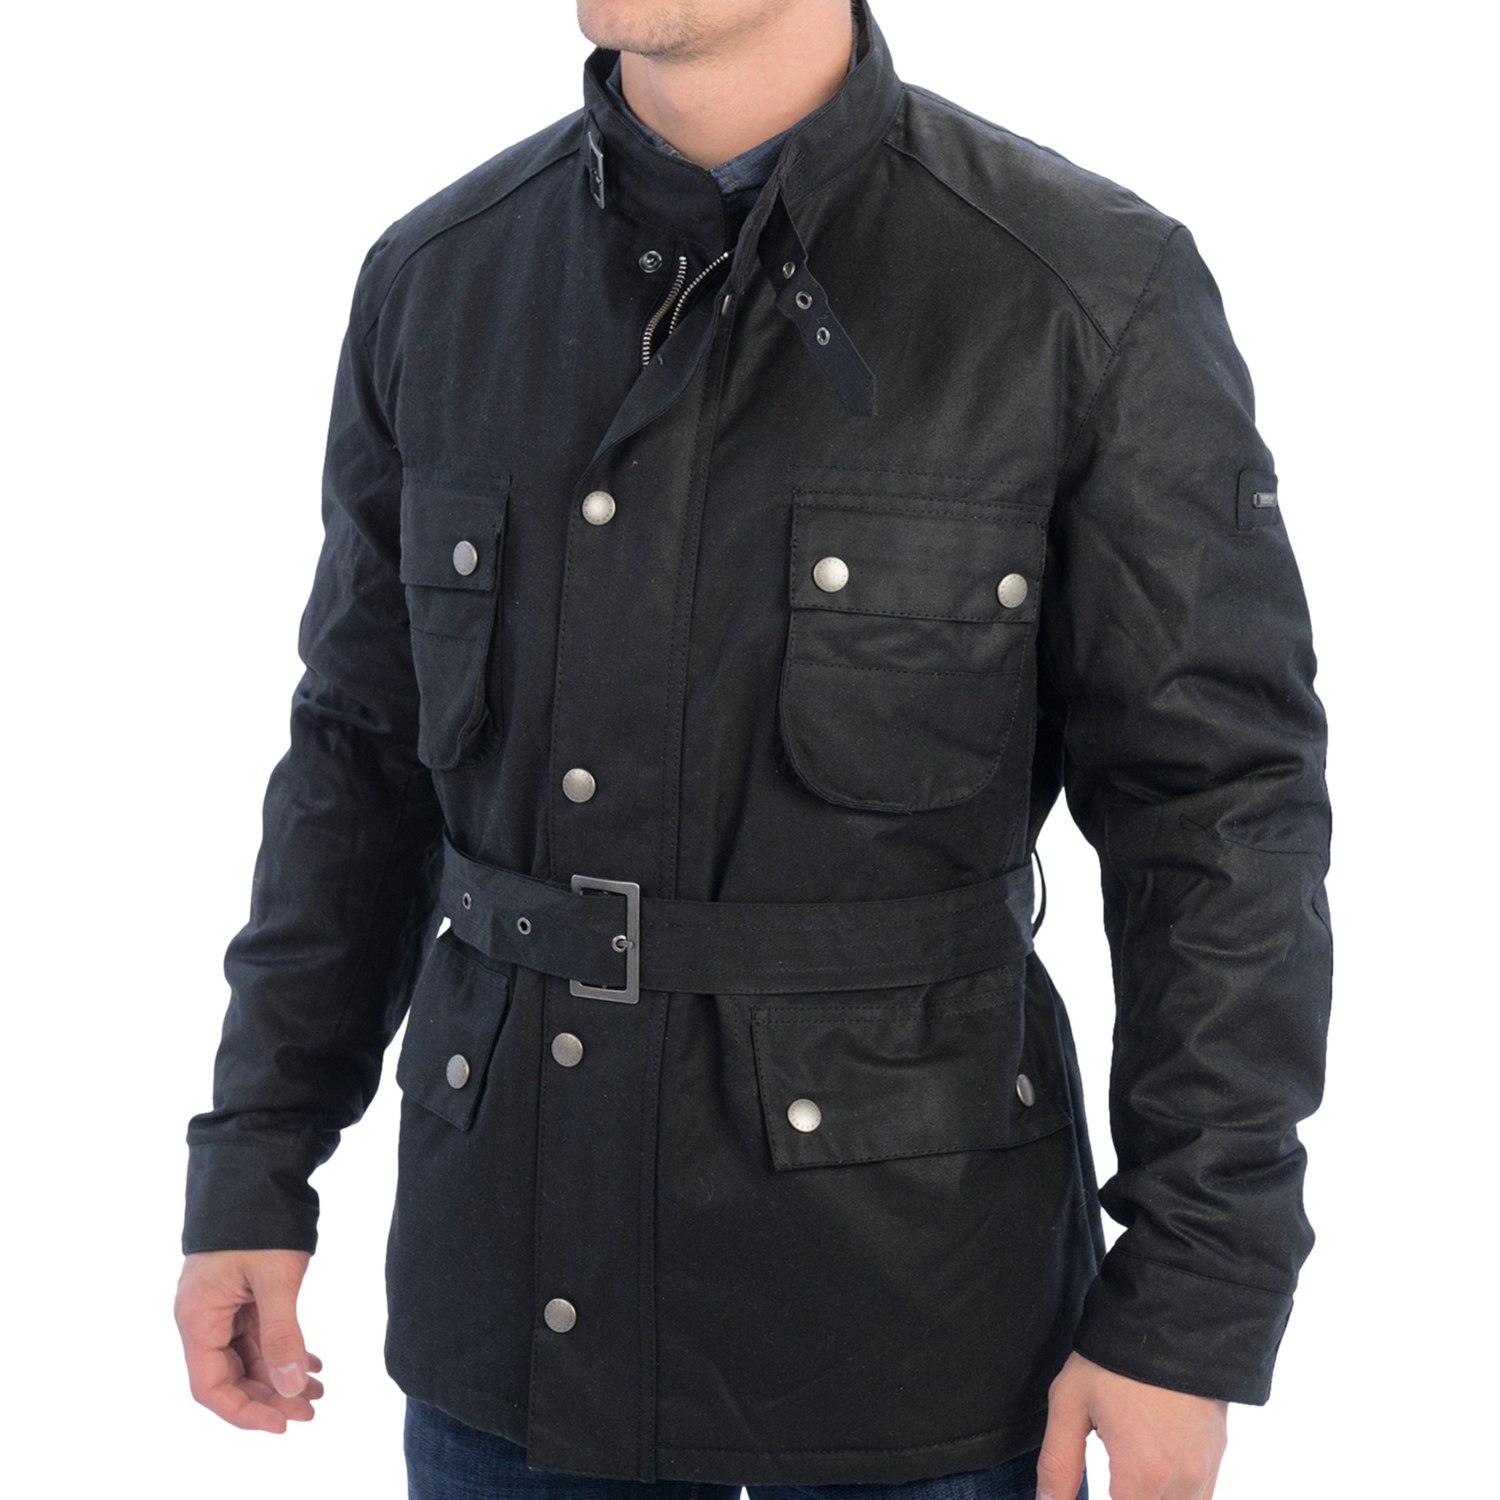 Barbour Strathdee Waxed Cotton Jacket (For Men) 8948J - Save 55%